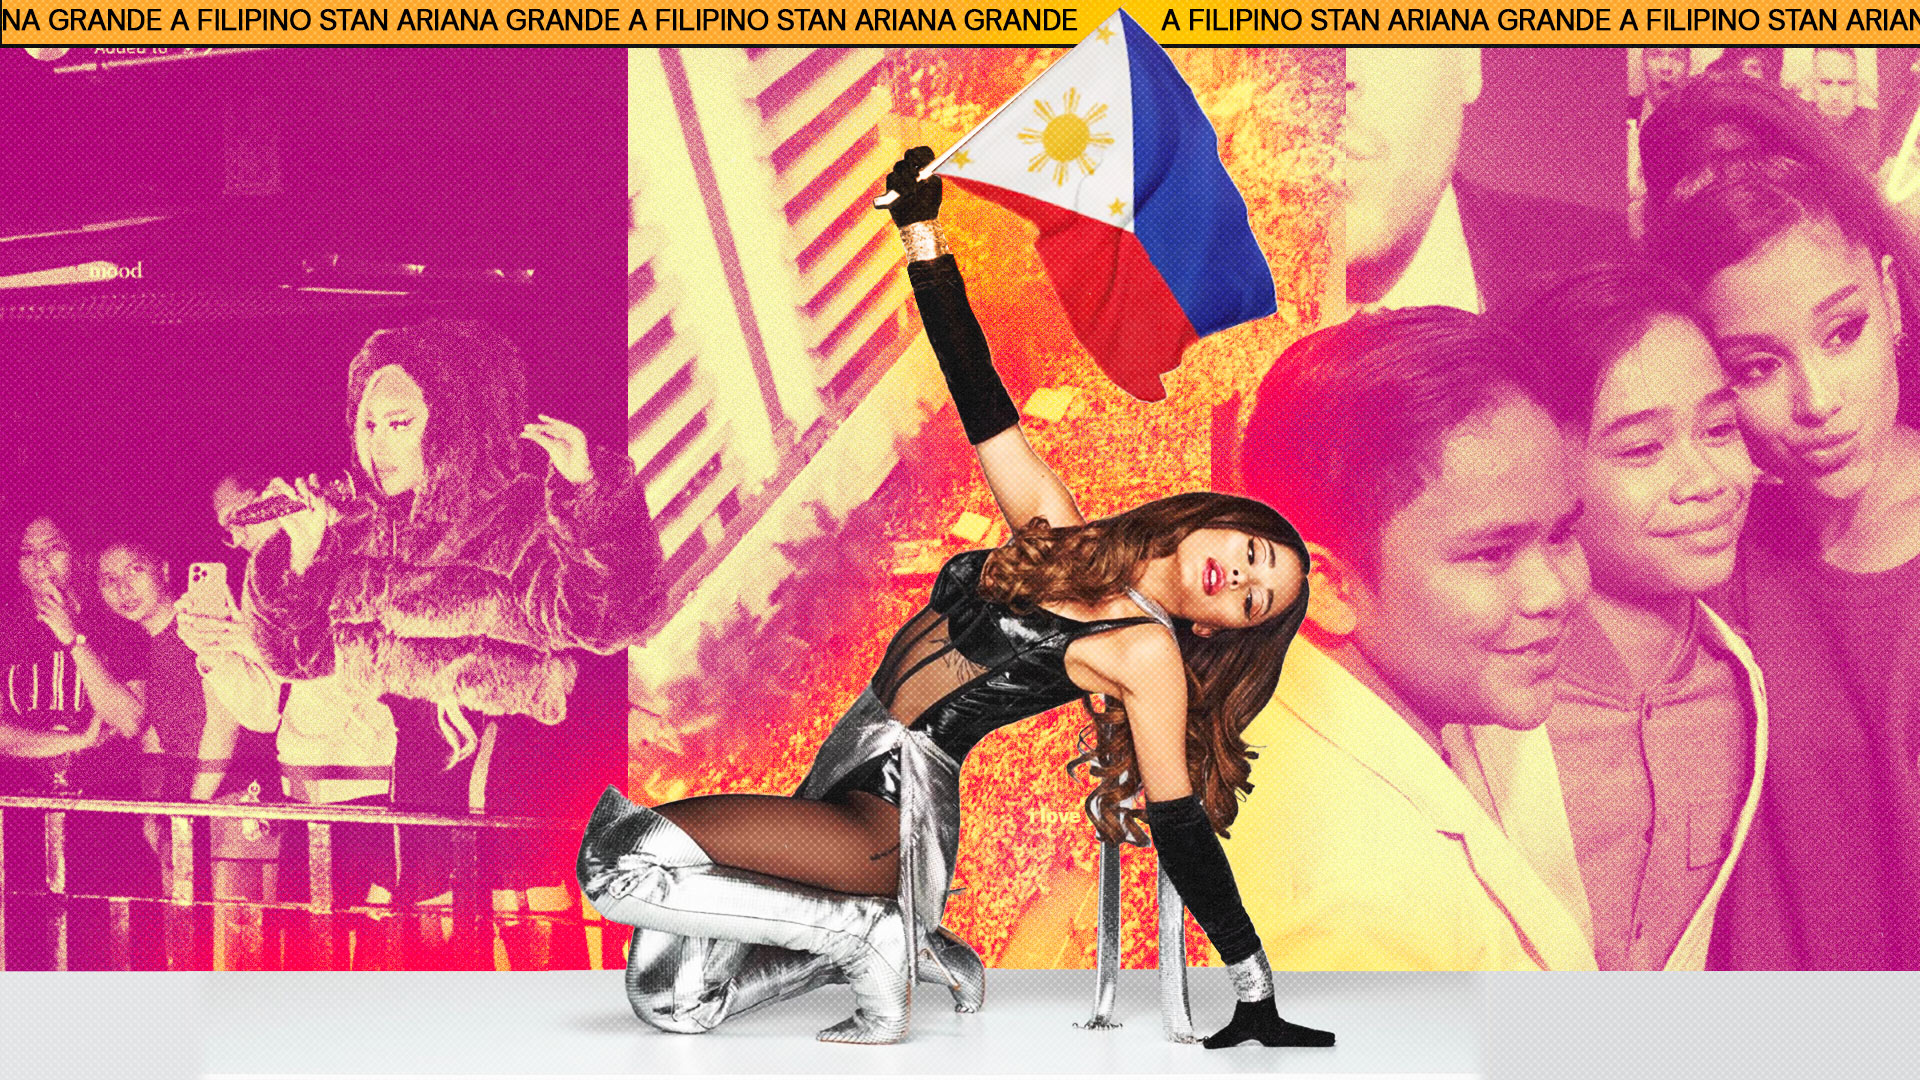 Ariana Grande Has Earned Herself A Filipino Stan Card After These 6 Moments